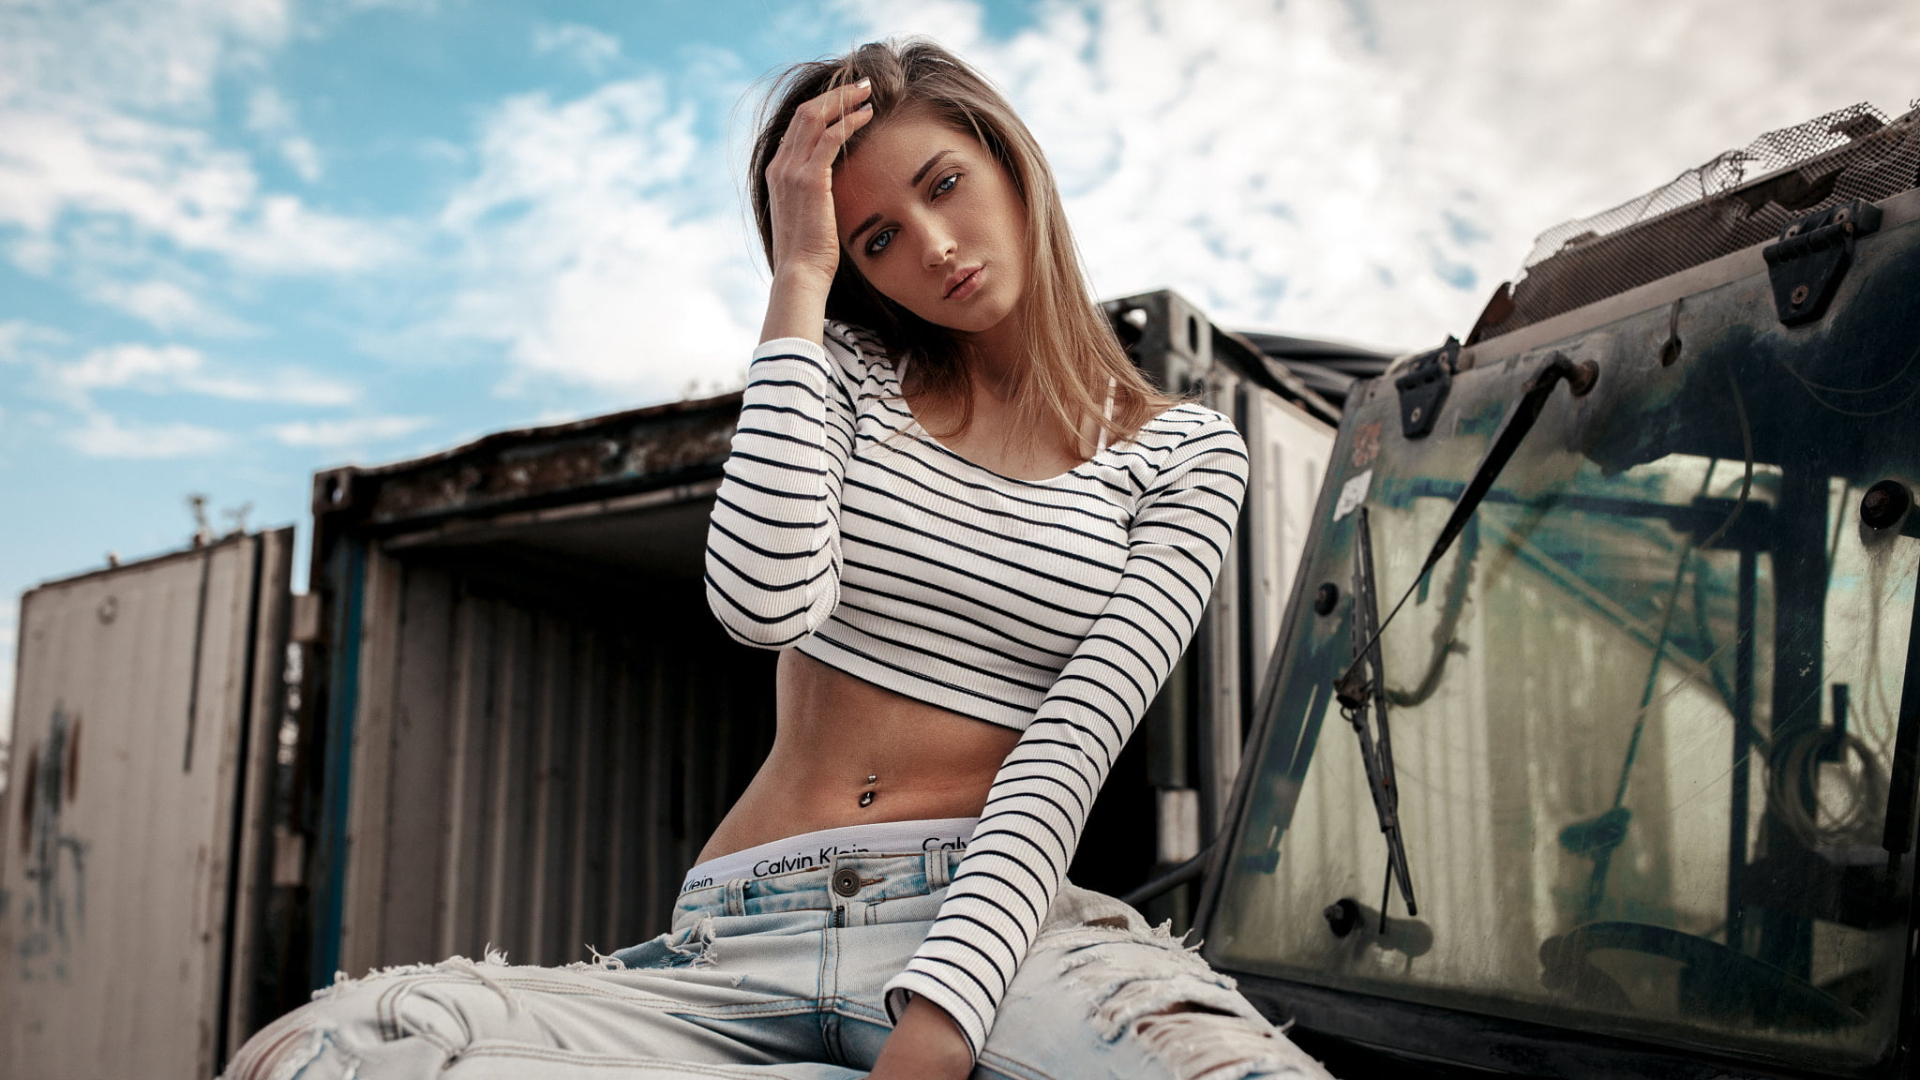 People 1920x1080 model women long hair jeans torn clothes belly button belly sitting blonde crop top sensual gaze makeup Calvin Klein lips smooth body face car